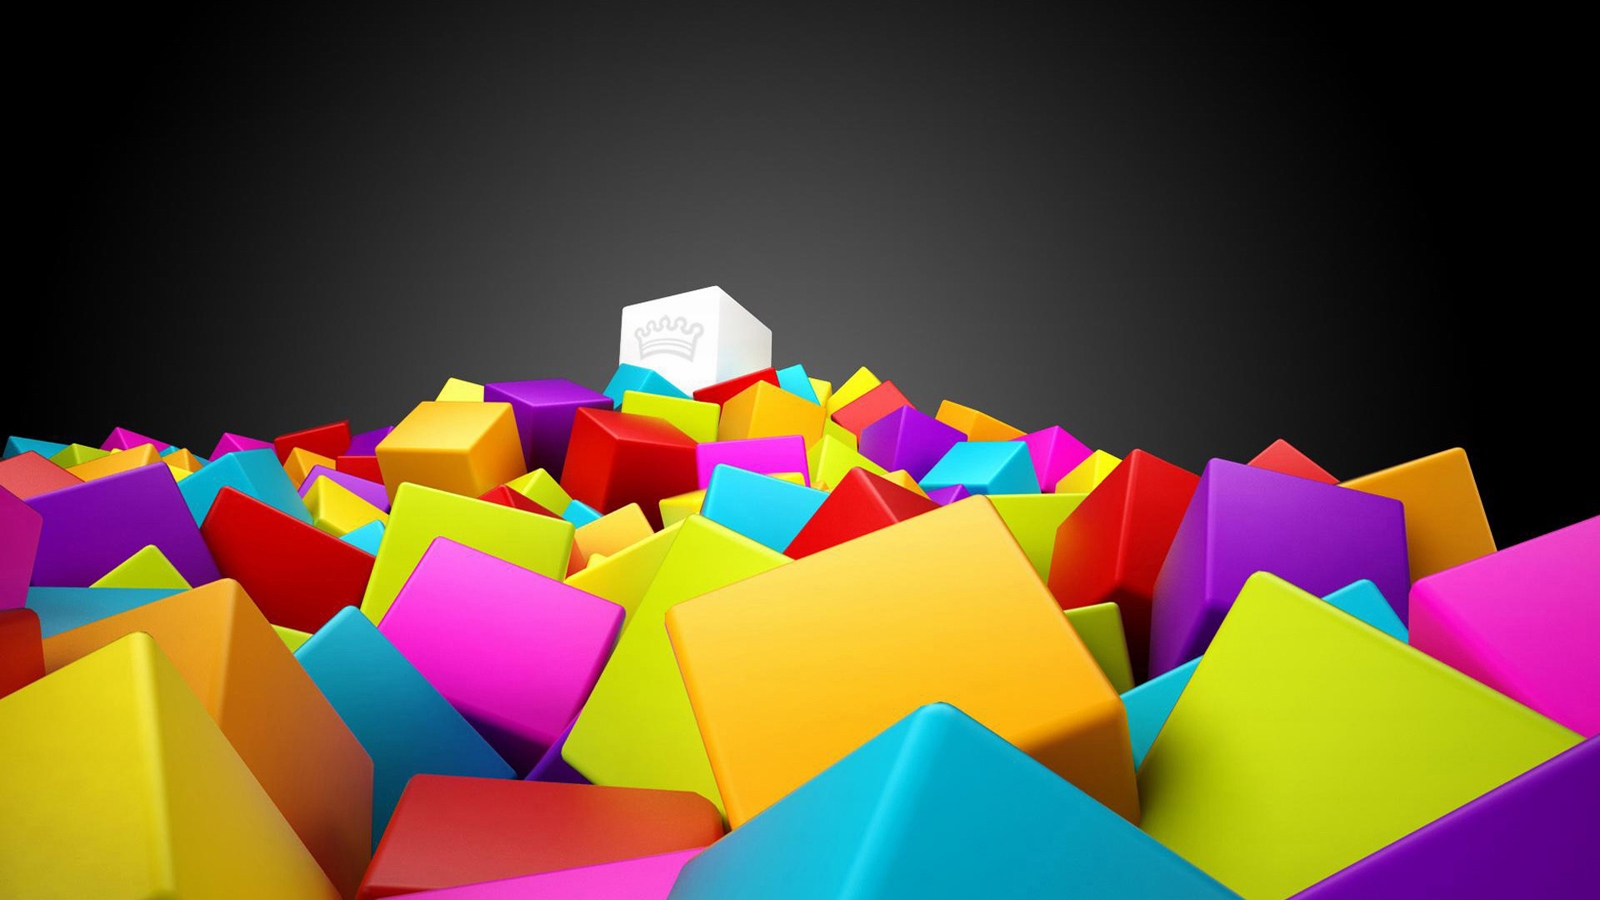 Awesome 3D Cubes and Cube King HD Wallpaper Hd Wallpaper